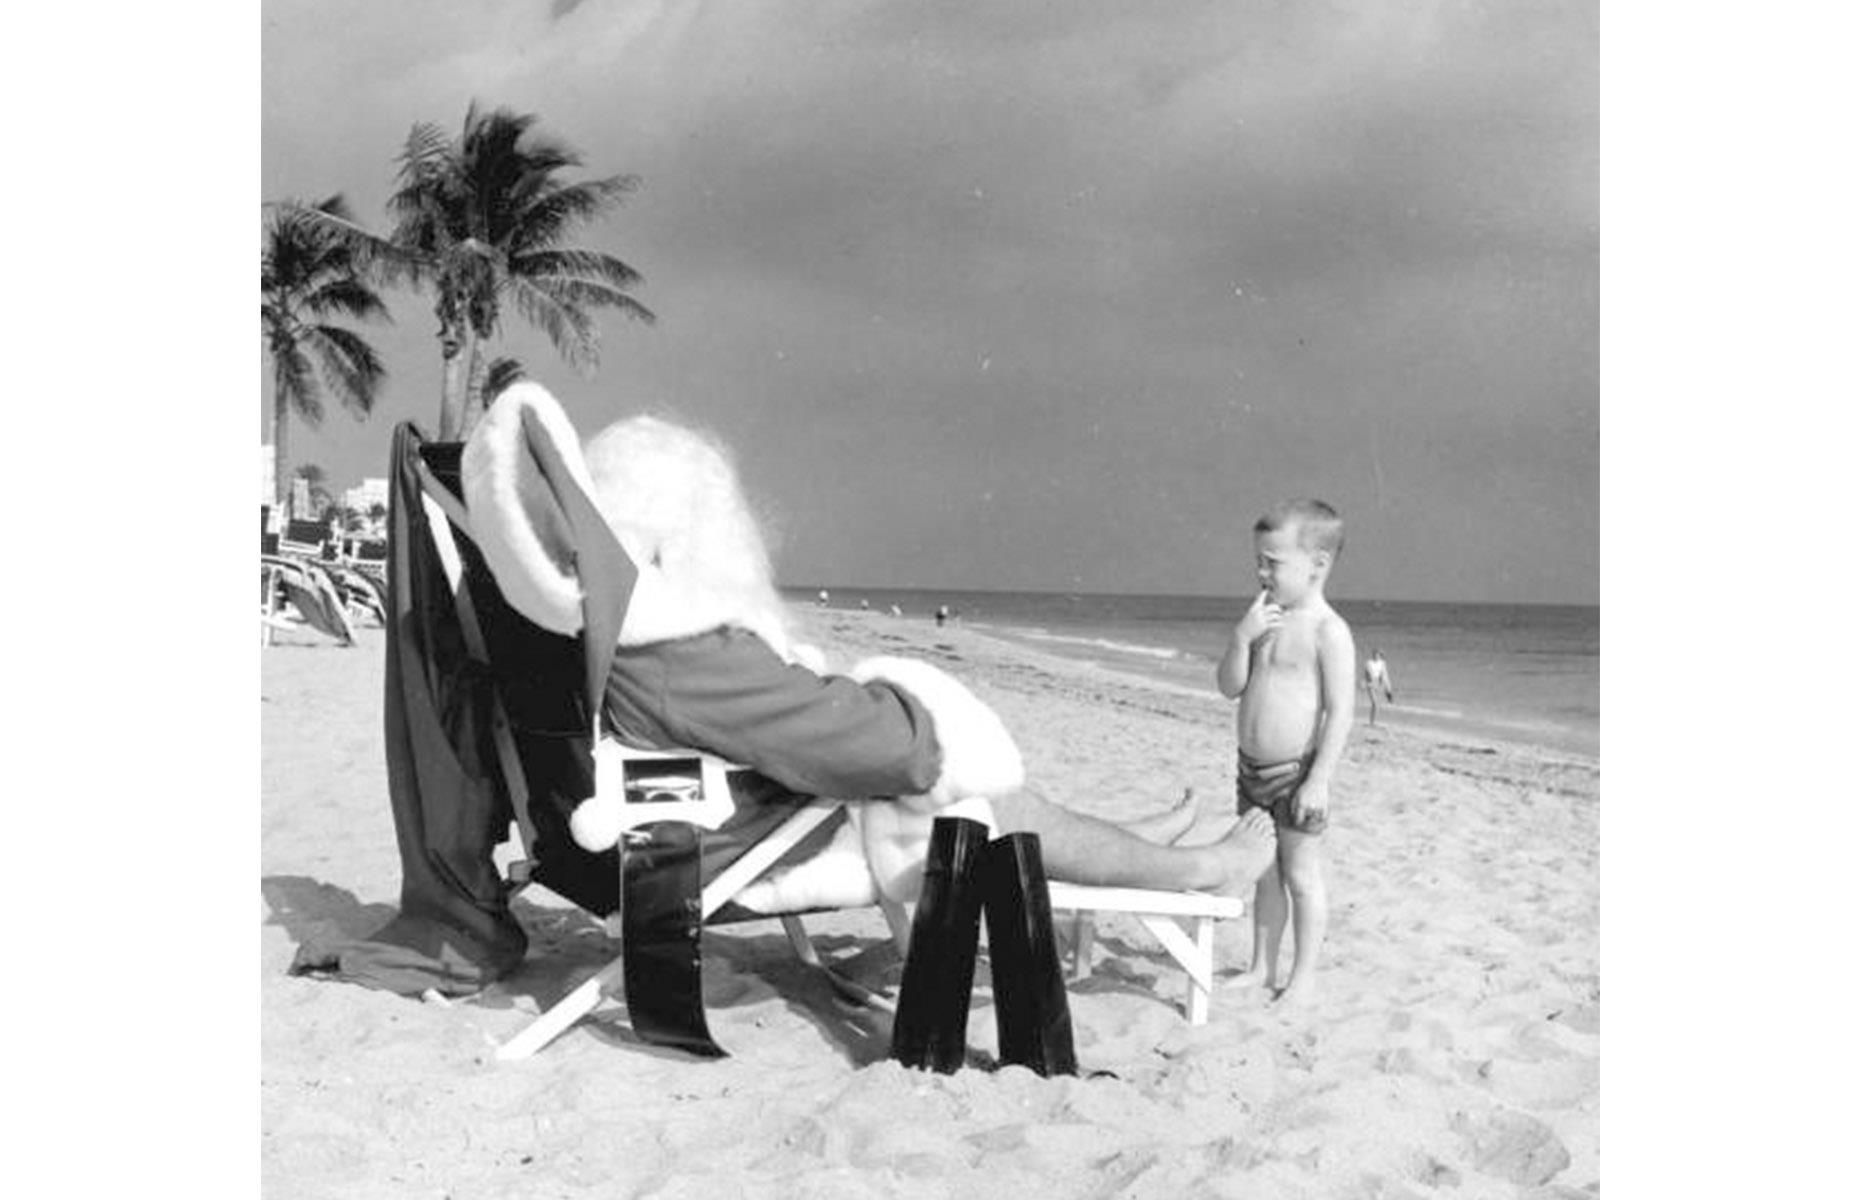 Even Santa Claus couldn't resist the glorious white sands of the Sunshine State. In this 1964 snap, a curious child gazes up at Saint Nick as he dozes on a deck chair beneath the palms.